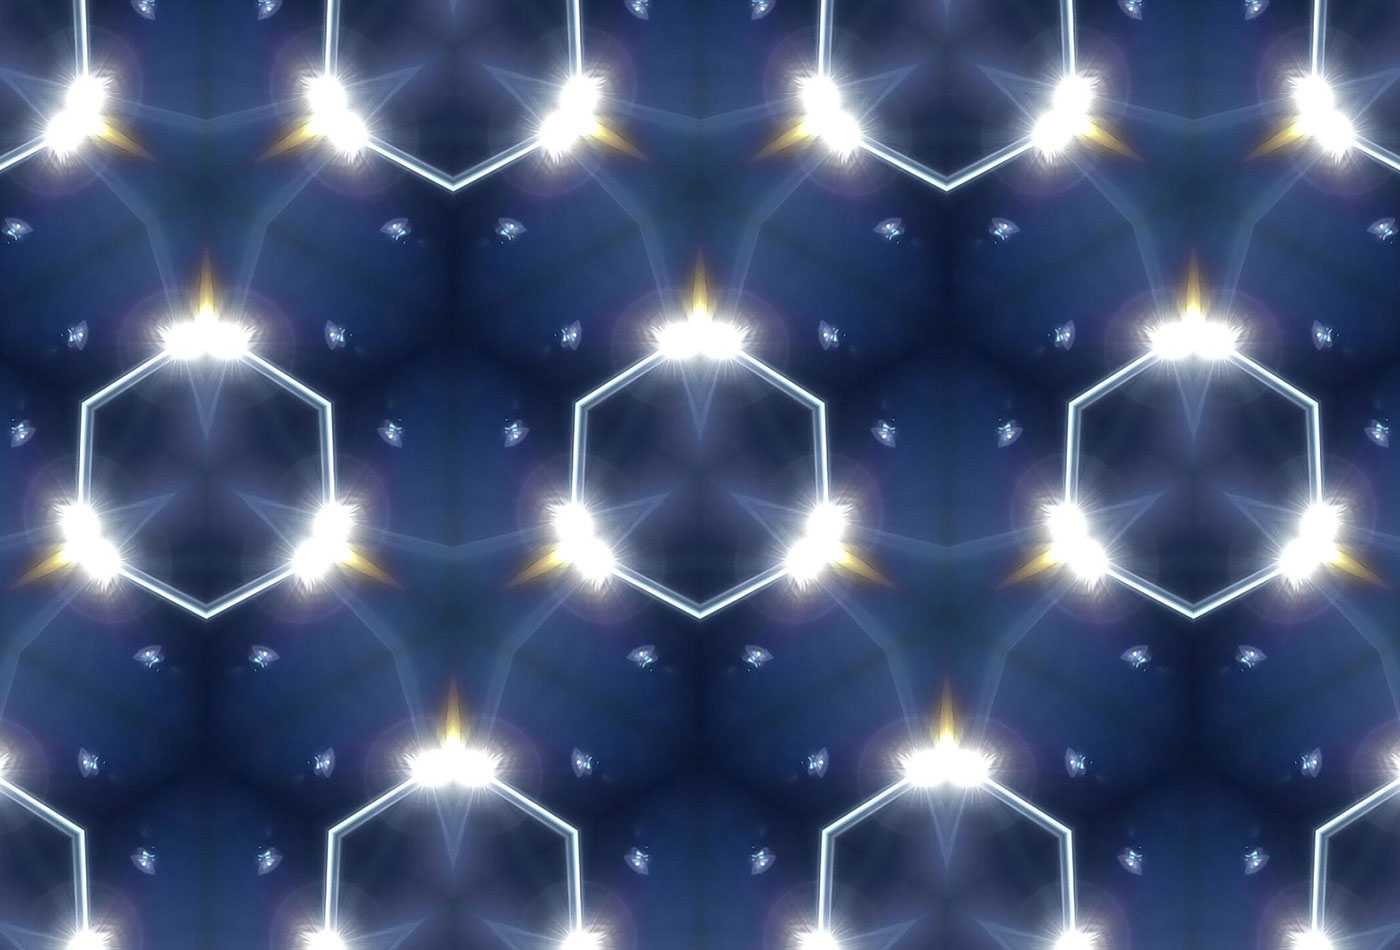 Light clusters